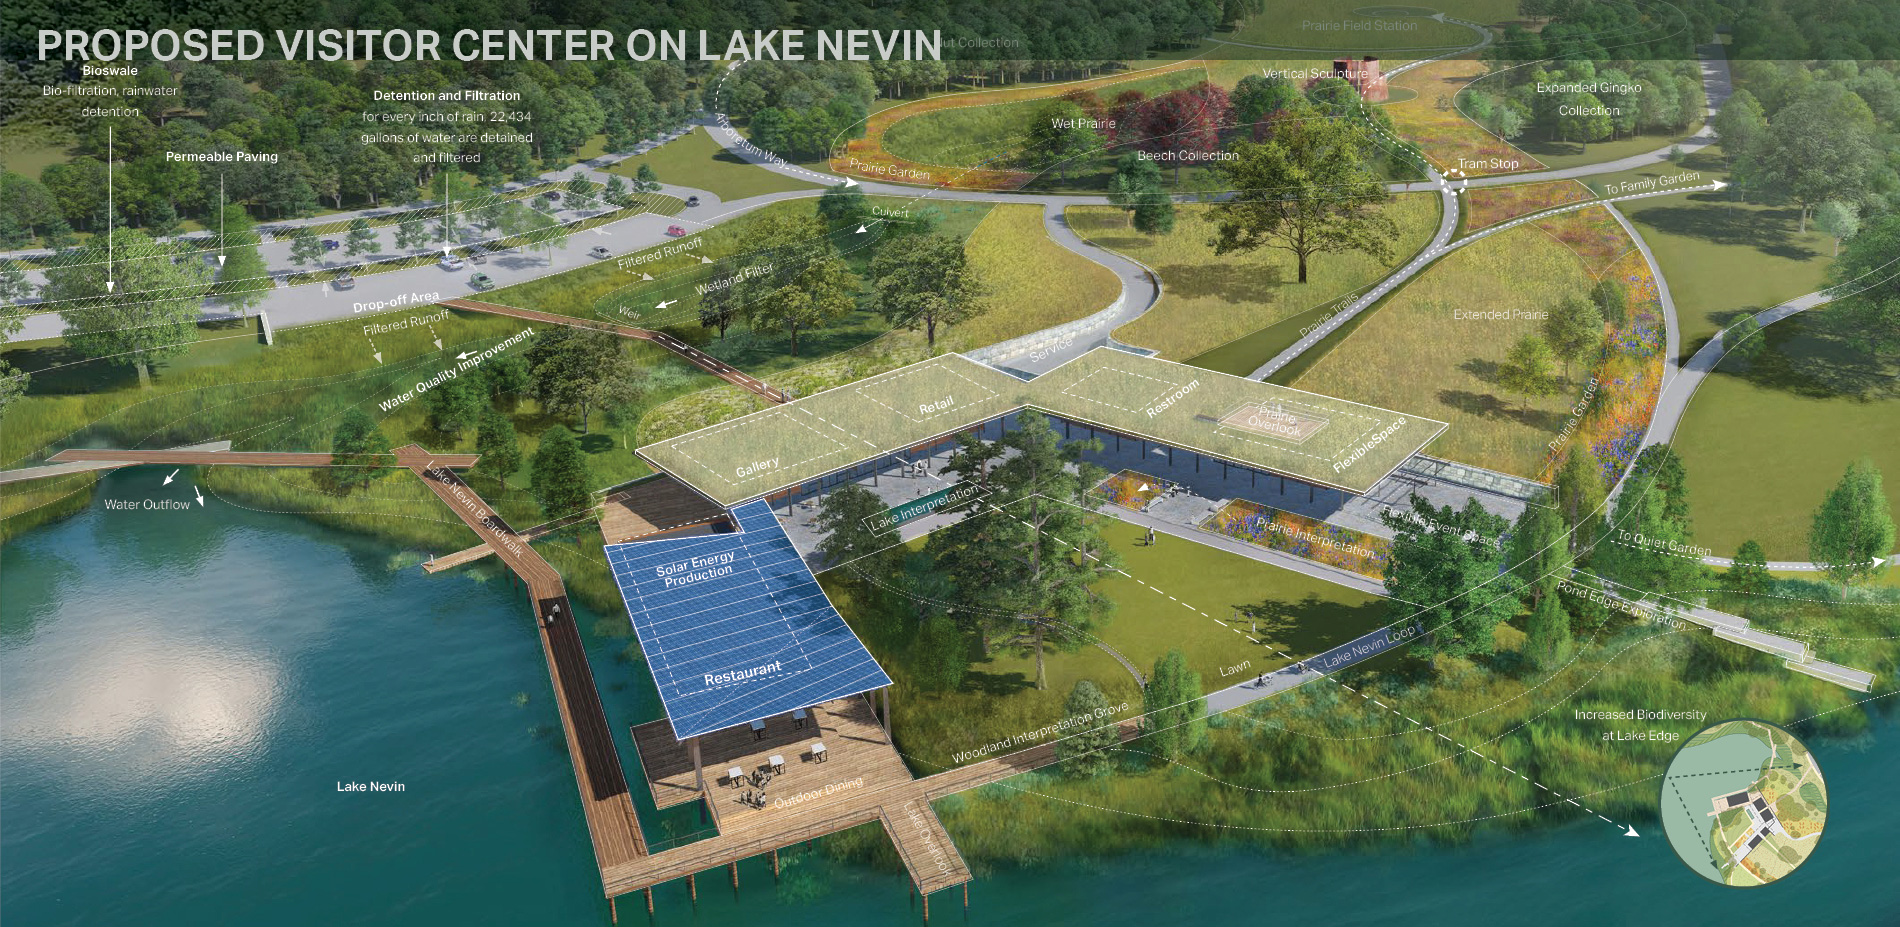  Proposed Visitor Center on Lake Nevin